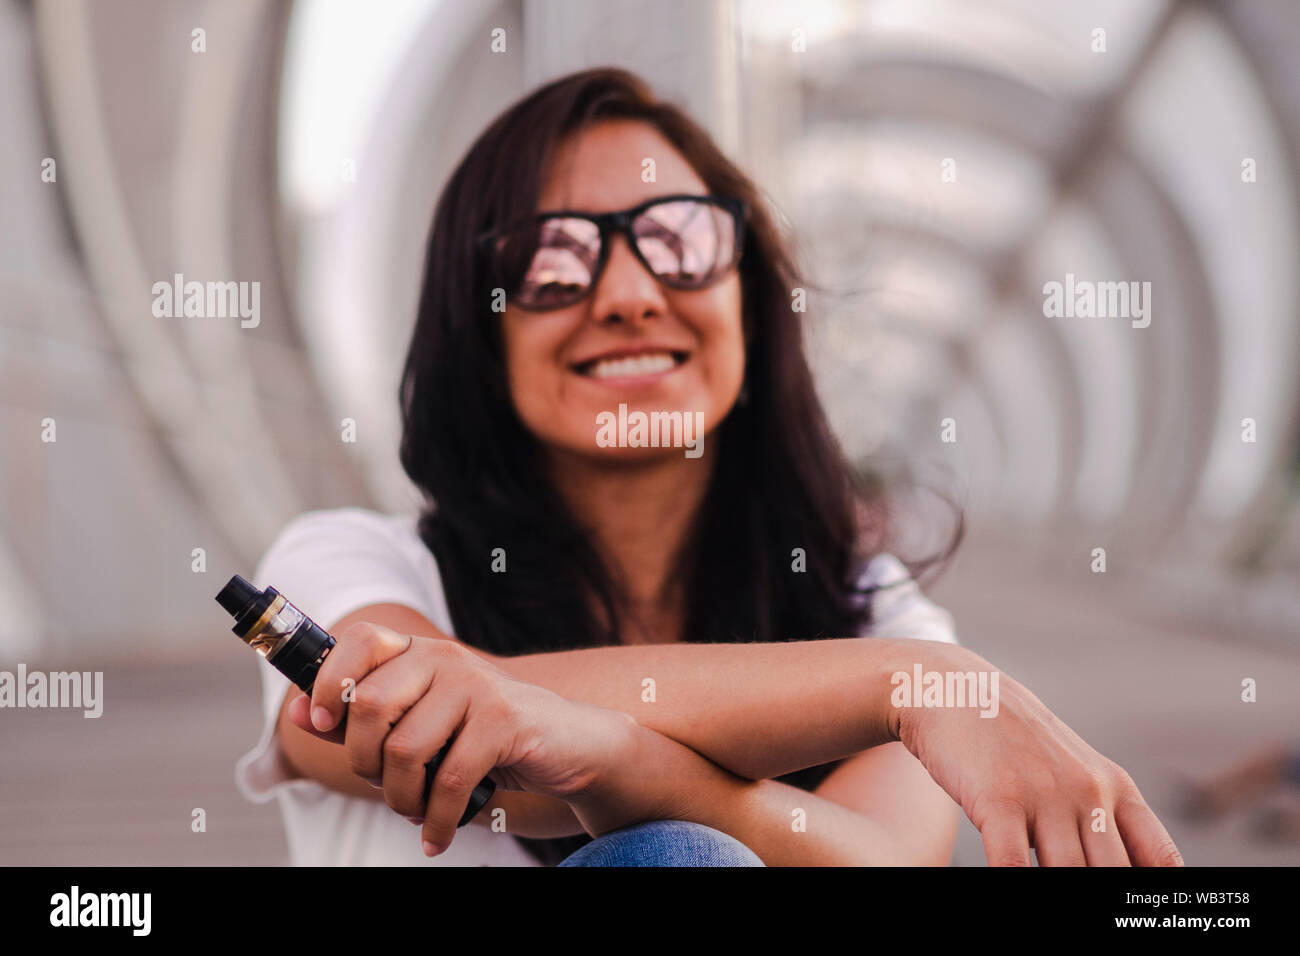 Young woman with sunglasses sitting on a picturesque bridge holding a vaper Stock Photo